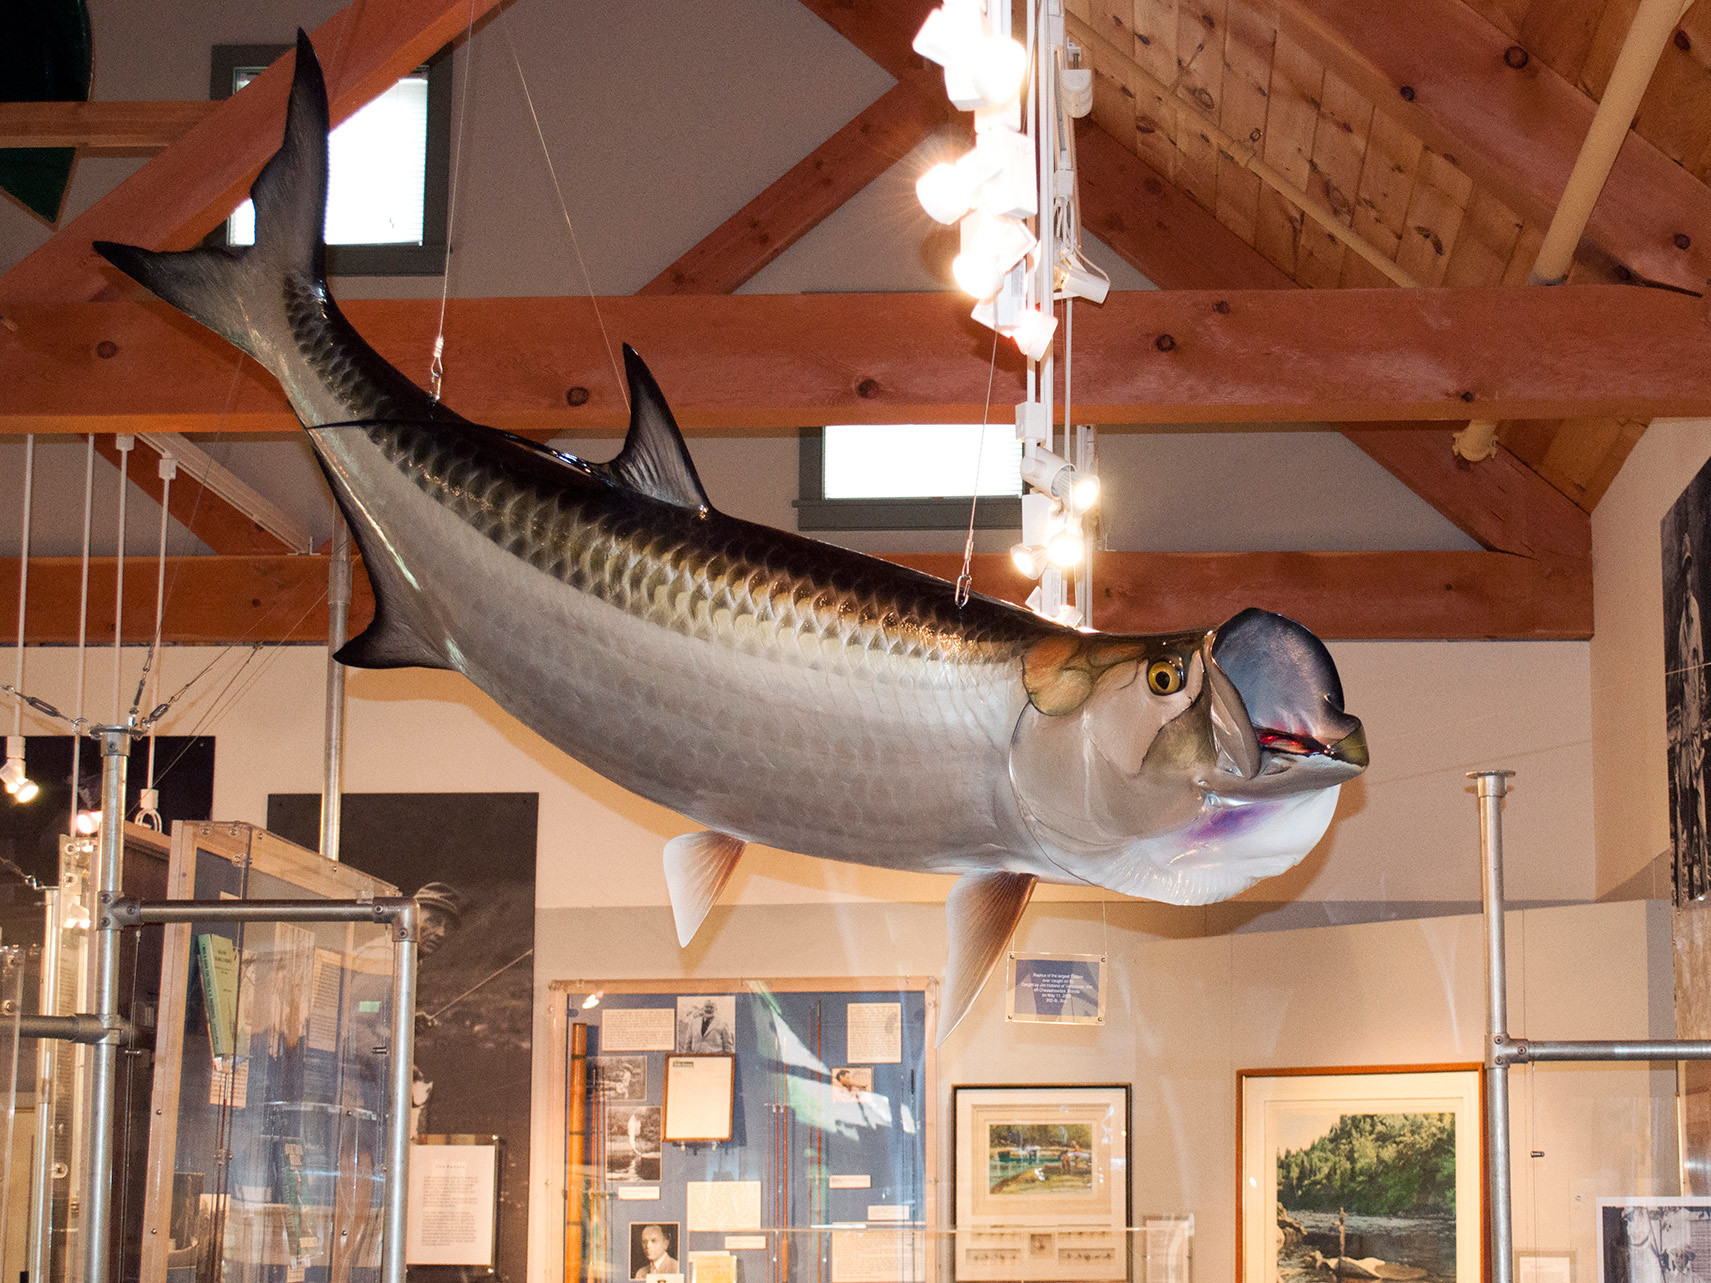 The American Museum of Fly Fishing accepts a collection of nearly